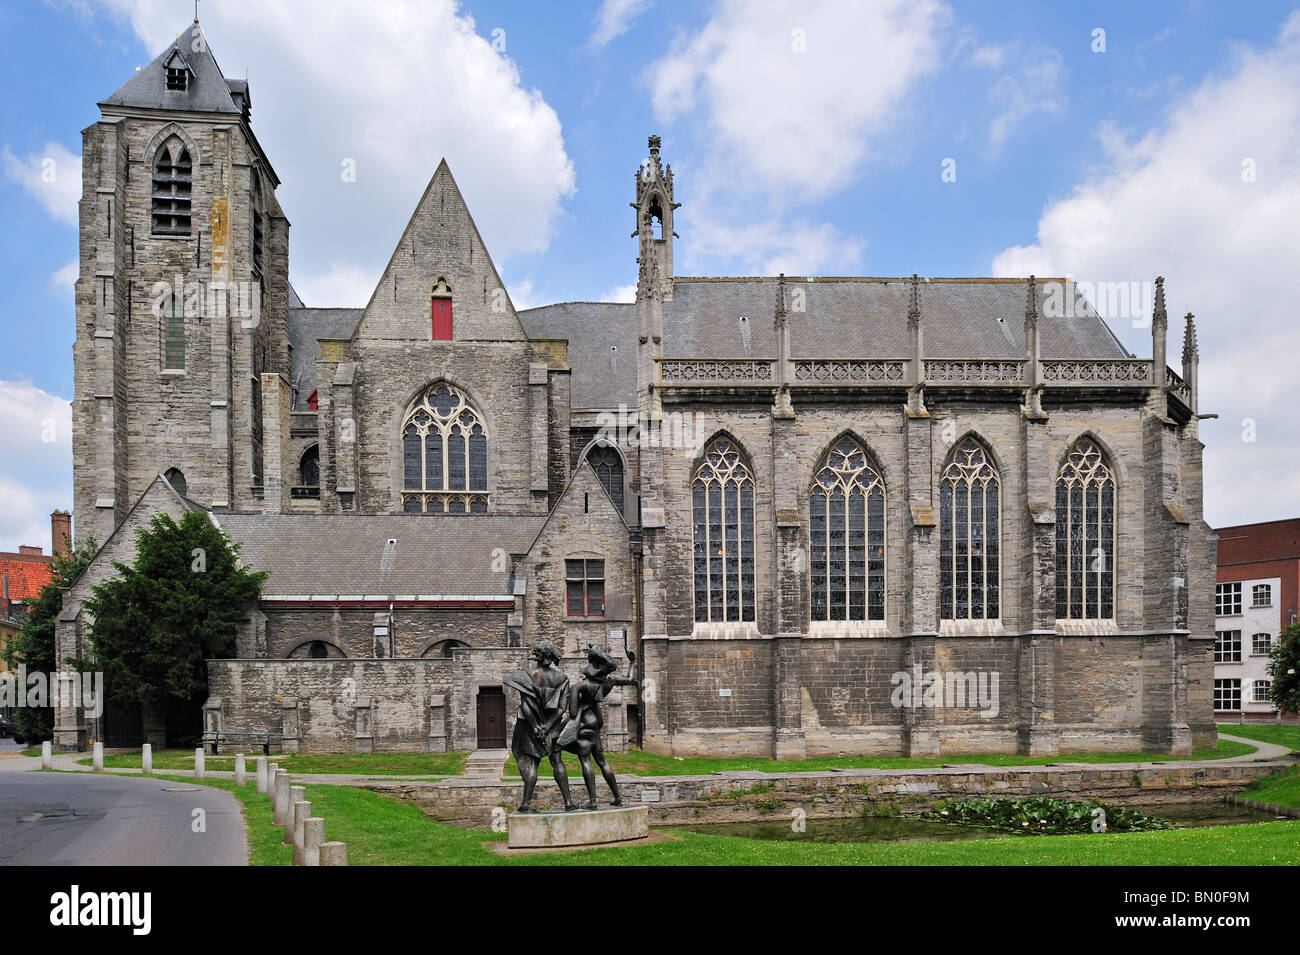 The church of Our Lady (Onze-Lieve-Vrouwekerk) at Kortrijk, Belgium Stock Photo